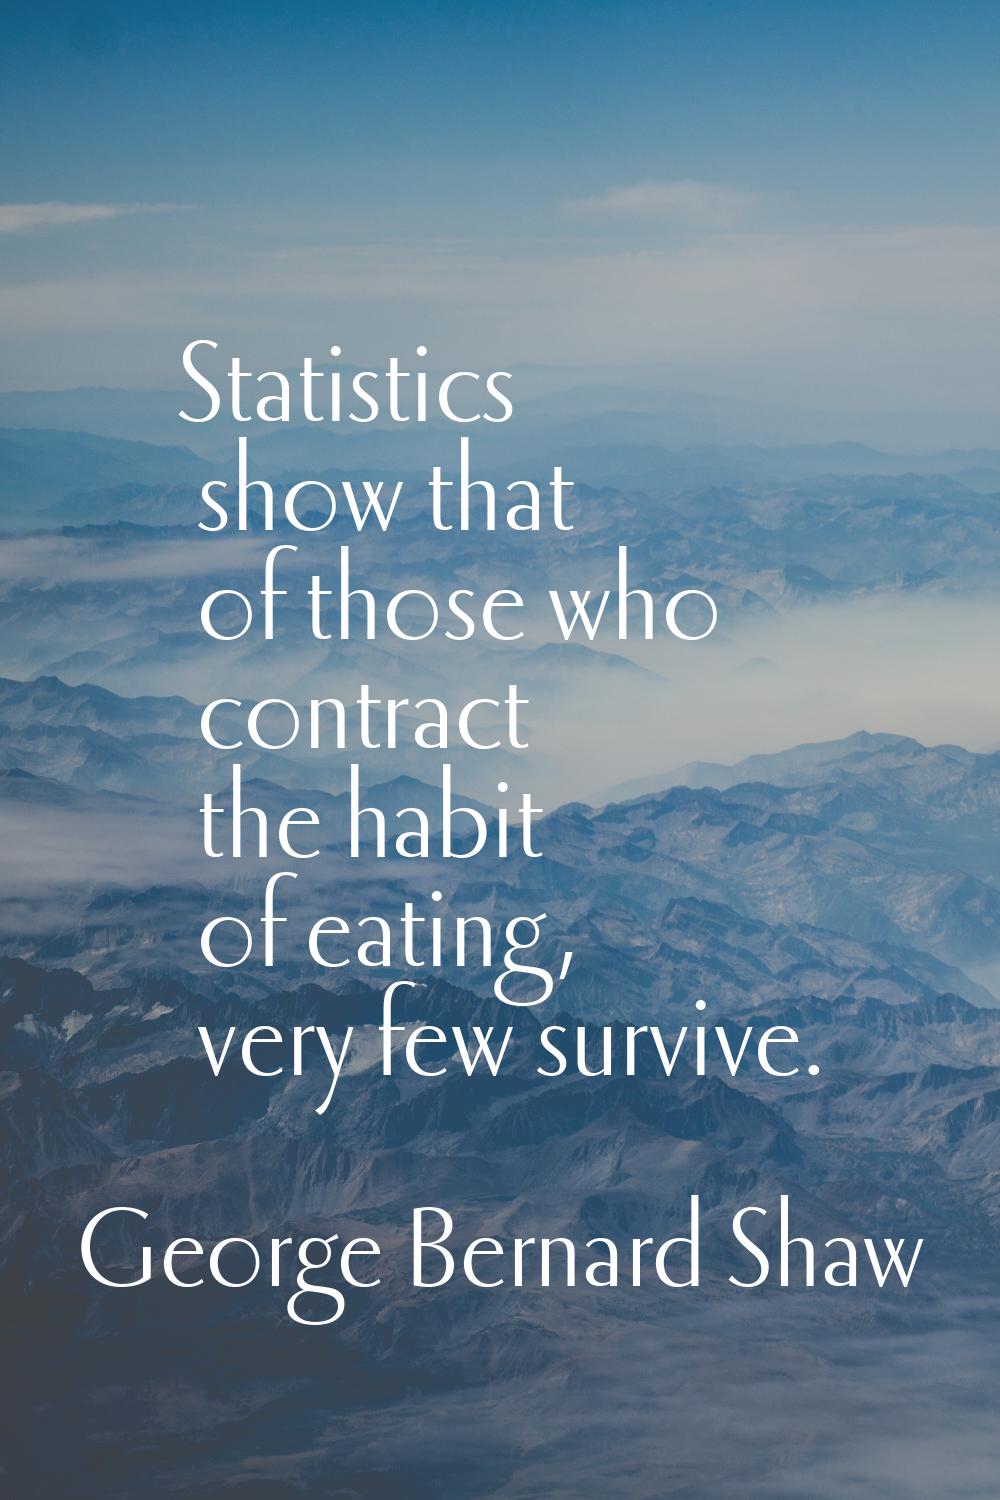 Statistics show that of those who contract the habit of eating, very few survive.